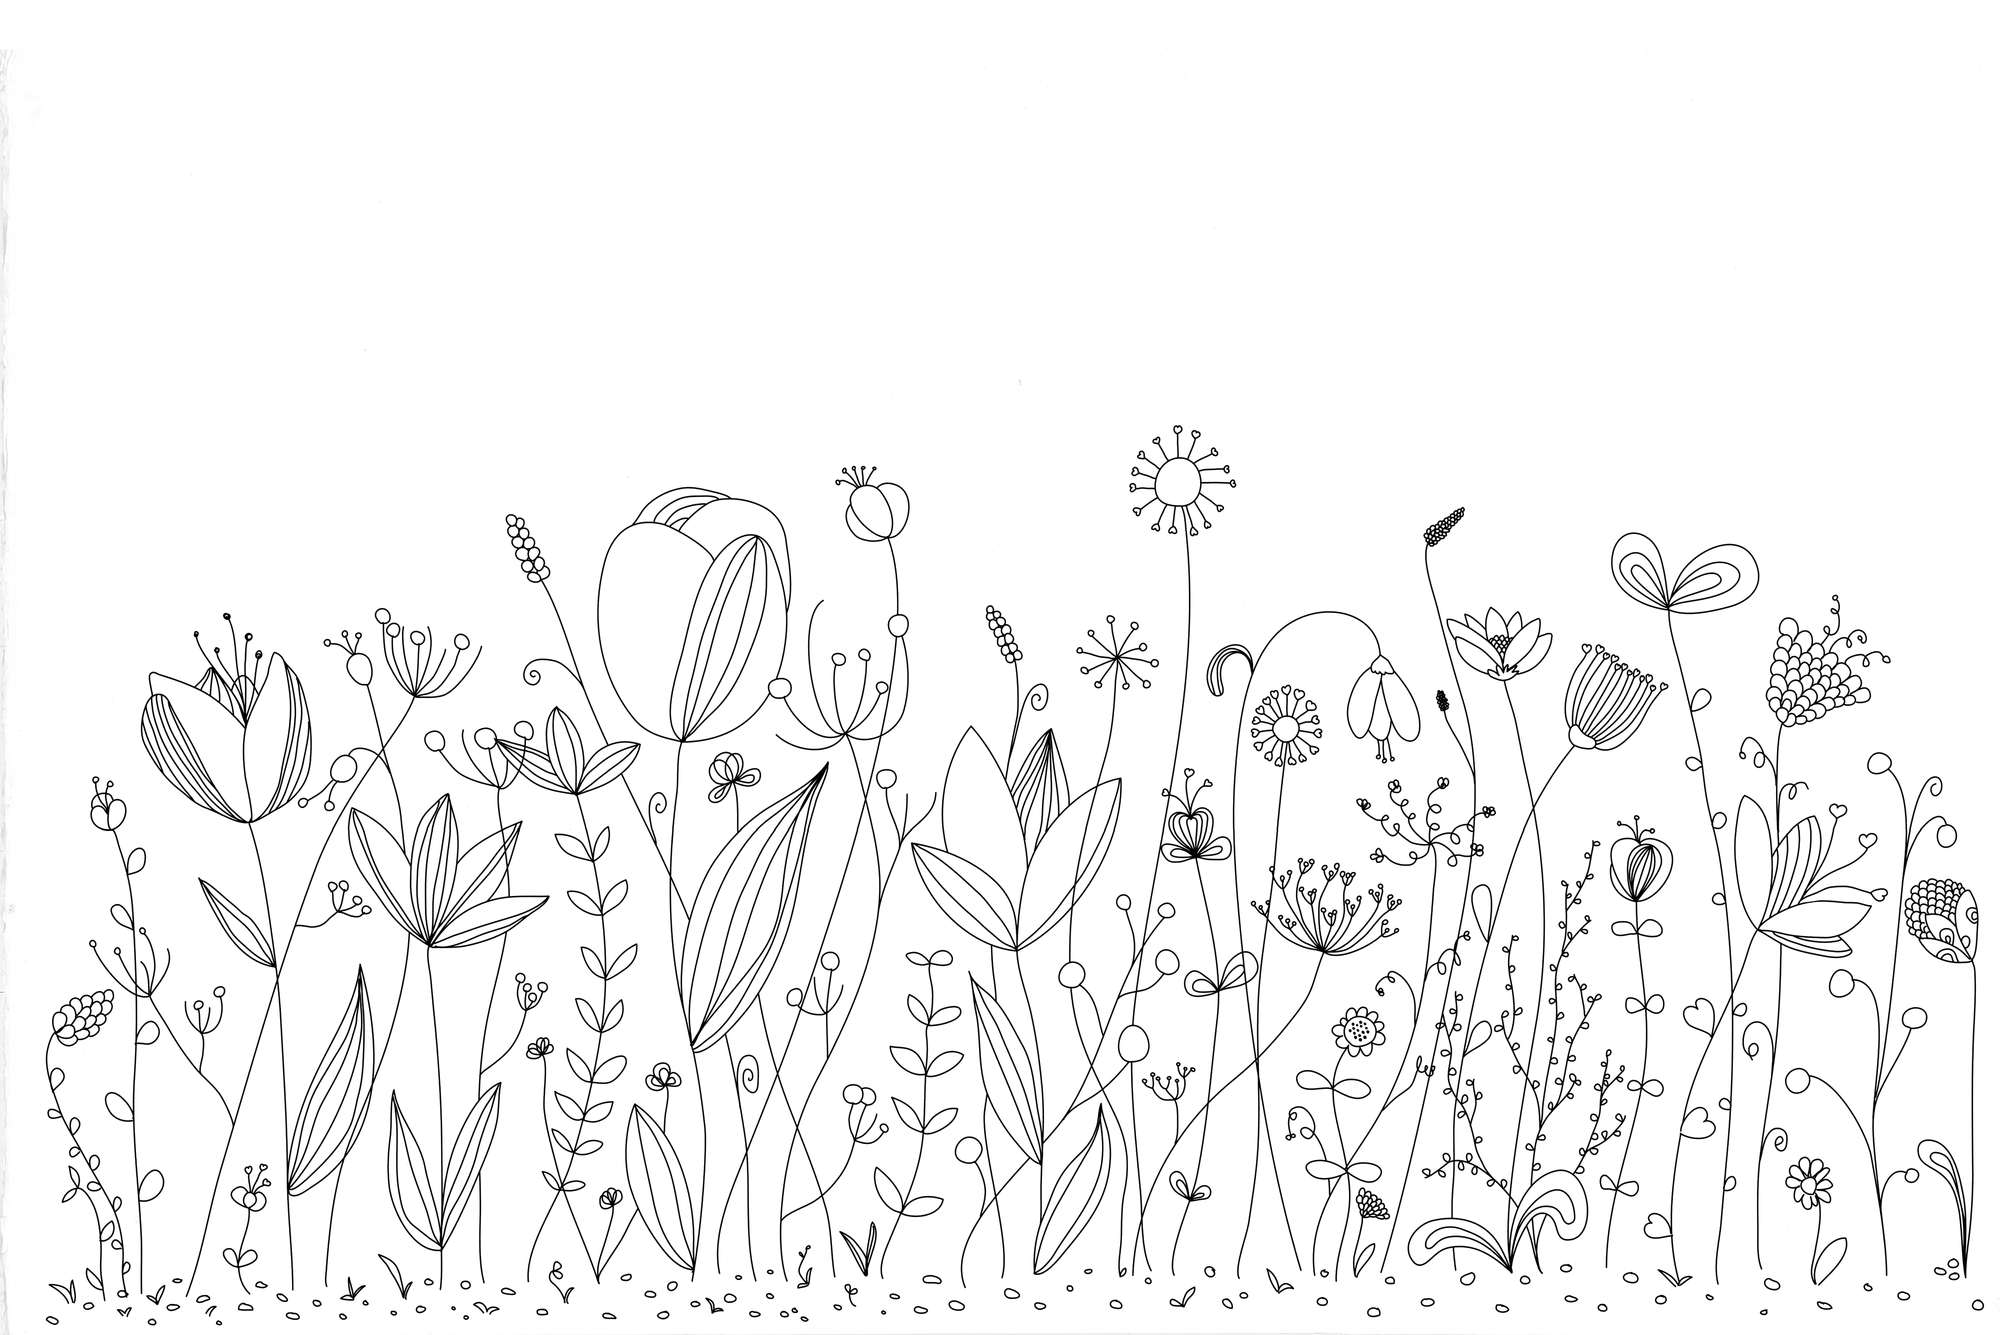             Kids mural with black and white drawn flowers on textured fleece
        